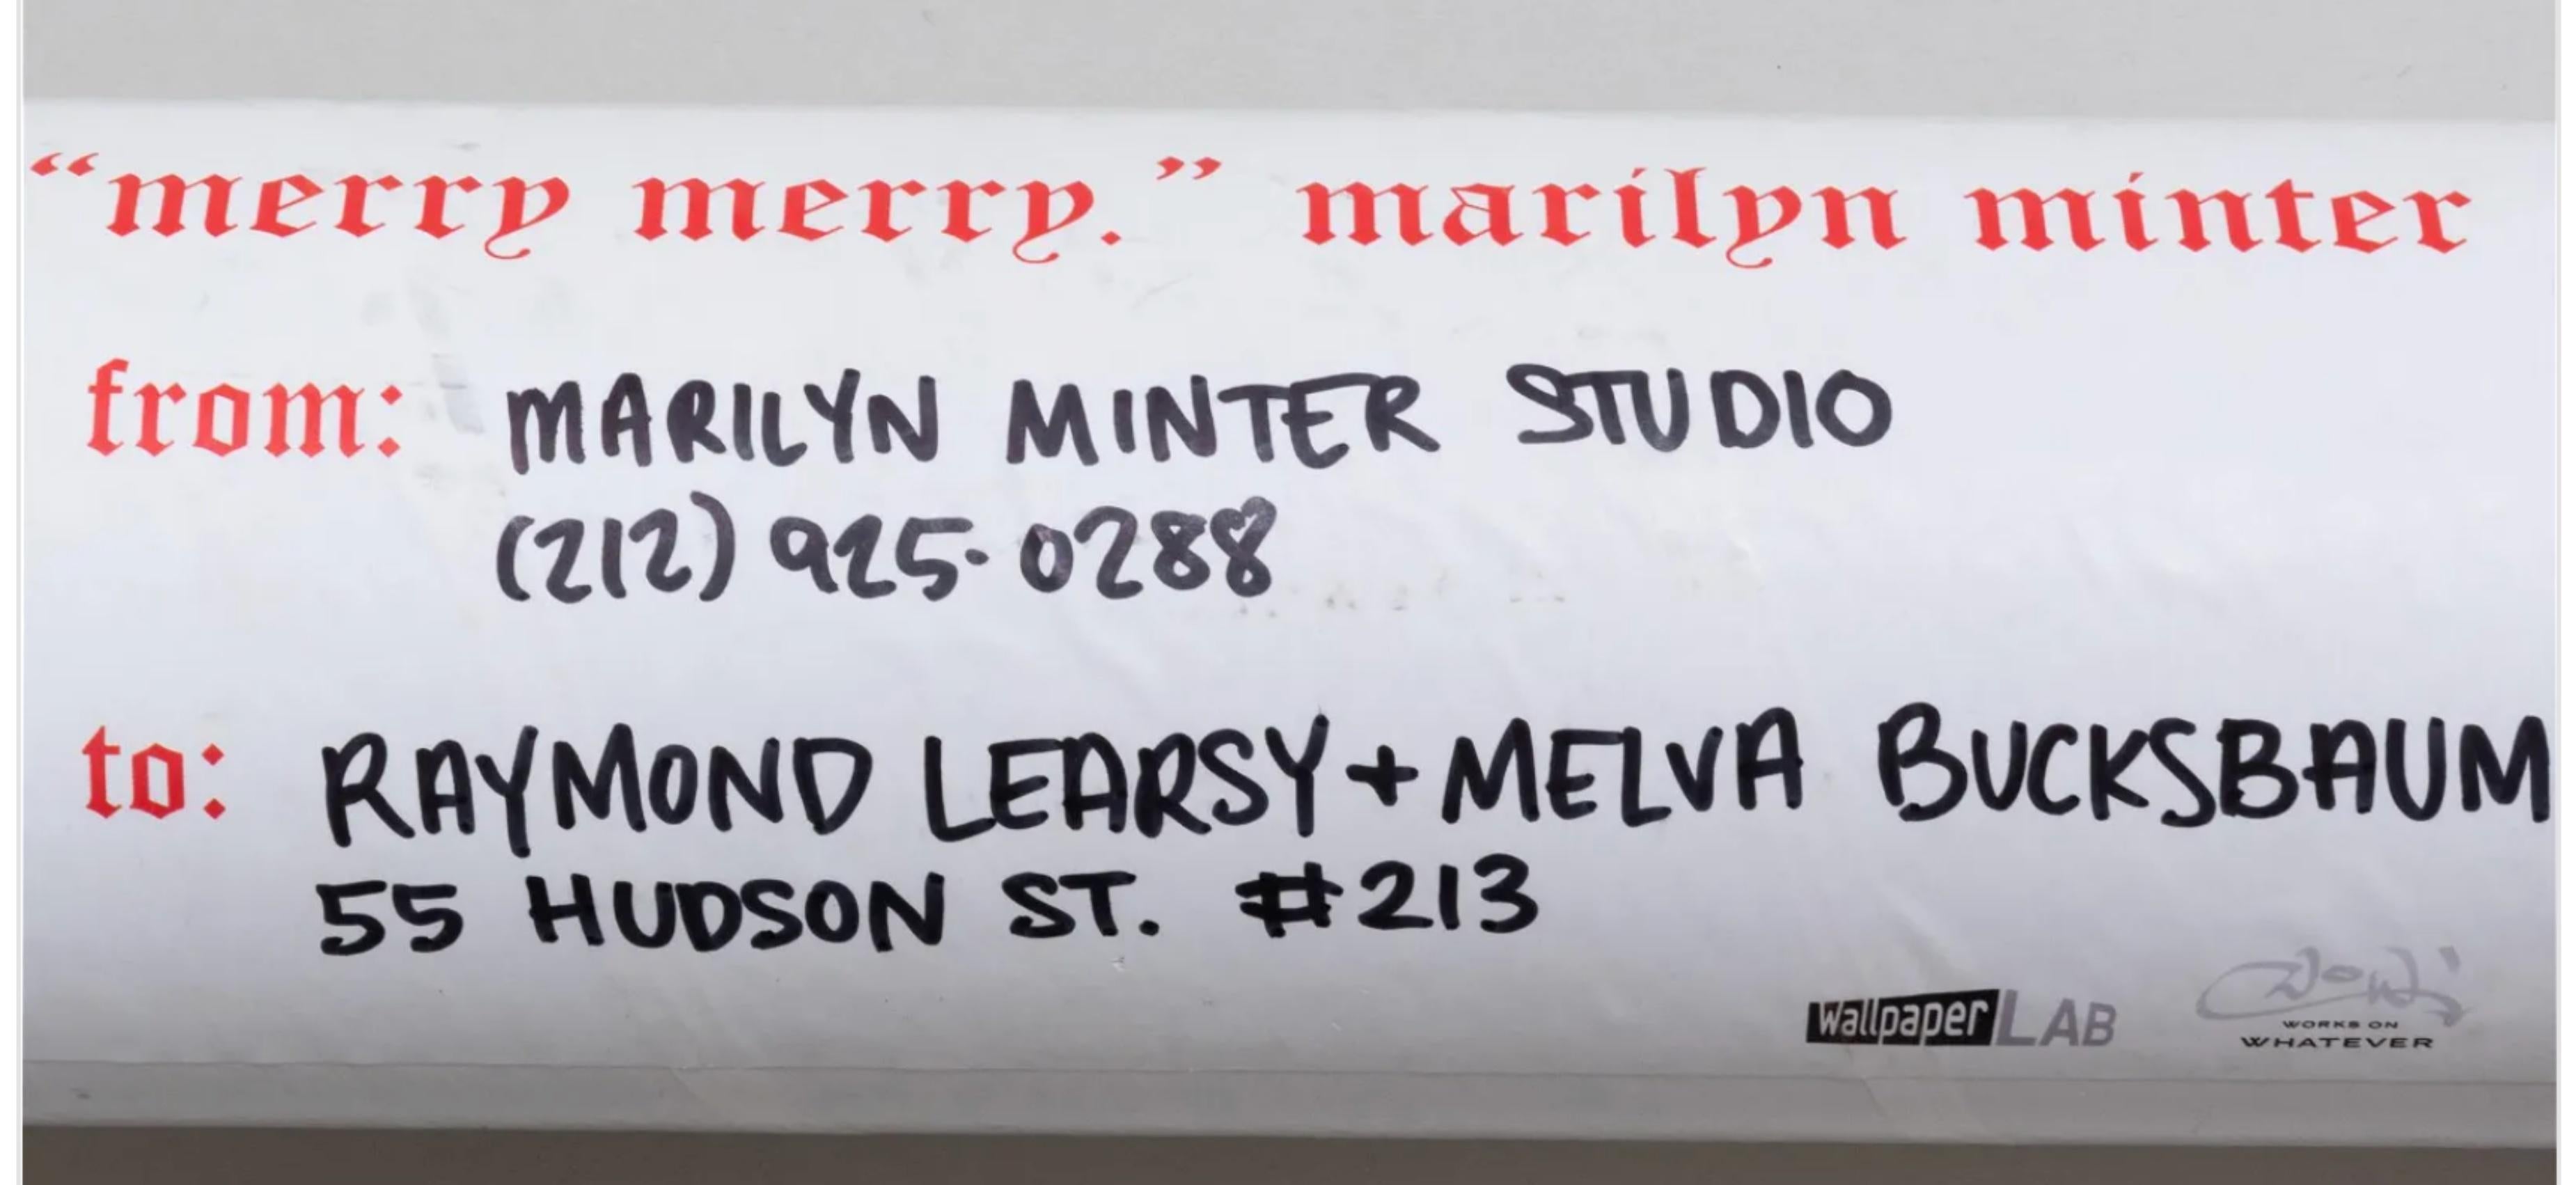 Marilyn Minter
Merry Merry: Limited Edition Large Christmas Stickers, 2007
One oversized sheet of die-cut vinyl stickers
The full size of the sheet when opened is: 48 inches x 72 inches
Ships in a tube measuring 37 x 6 x 6 inches
Outside label on